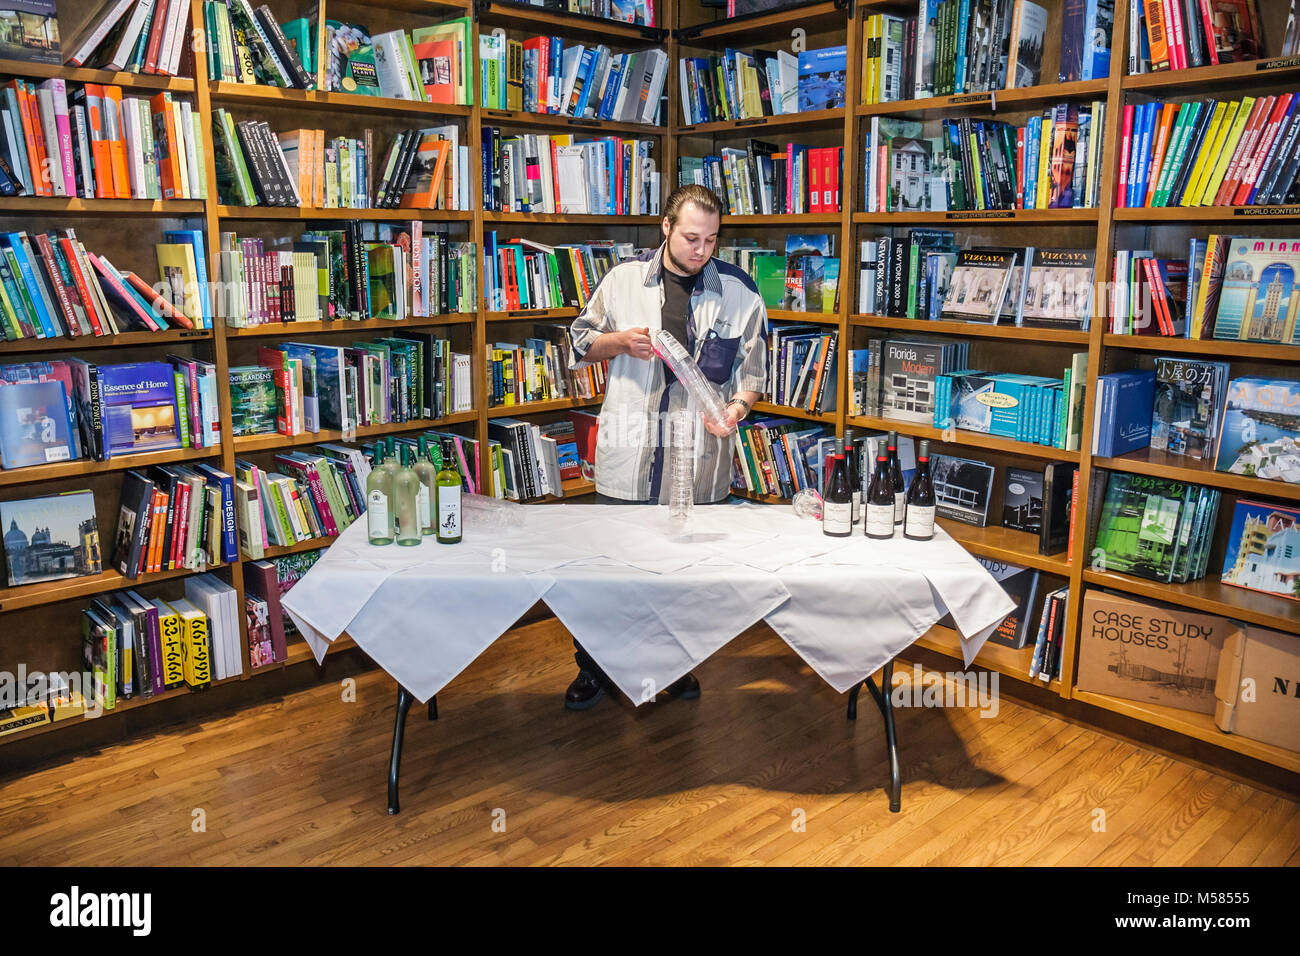 Miami Florida,Coral Gables,Books and Books,National Book Critics Circle,wine,refreshments,table,man men male adult adults,servers employee employees w Stock Photo